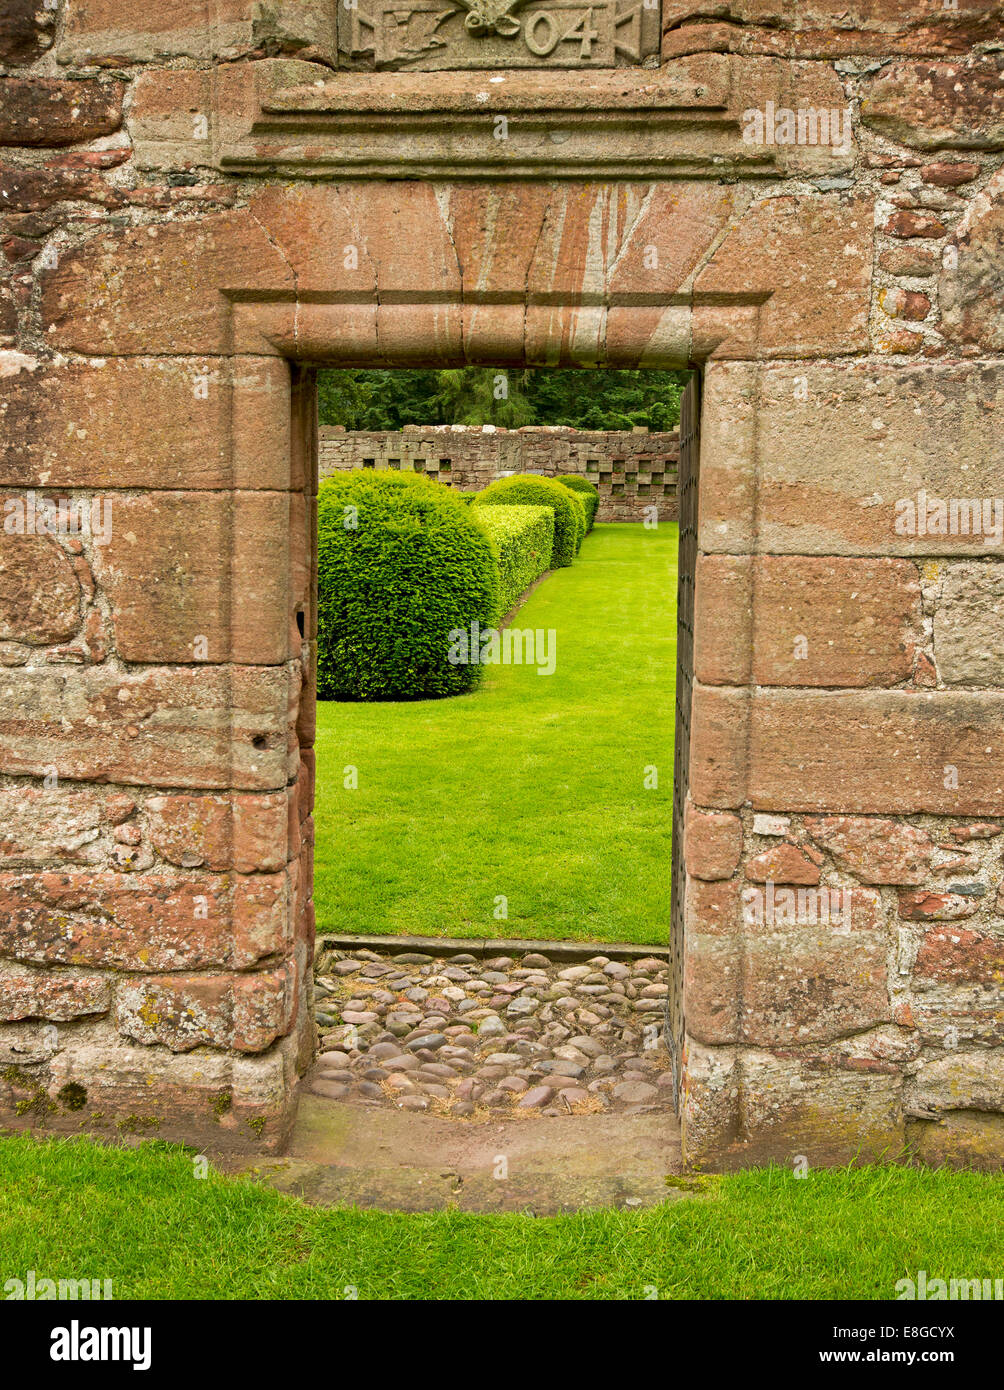 Square sided 17th century stone gateway leading into walled garden at Edzell castle in Scotland Stock Photo